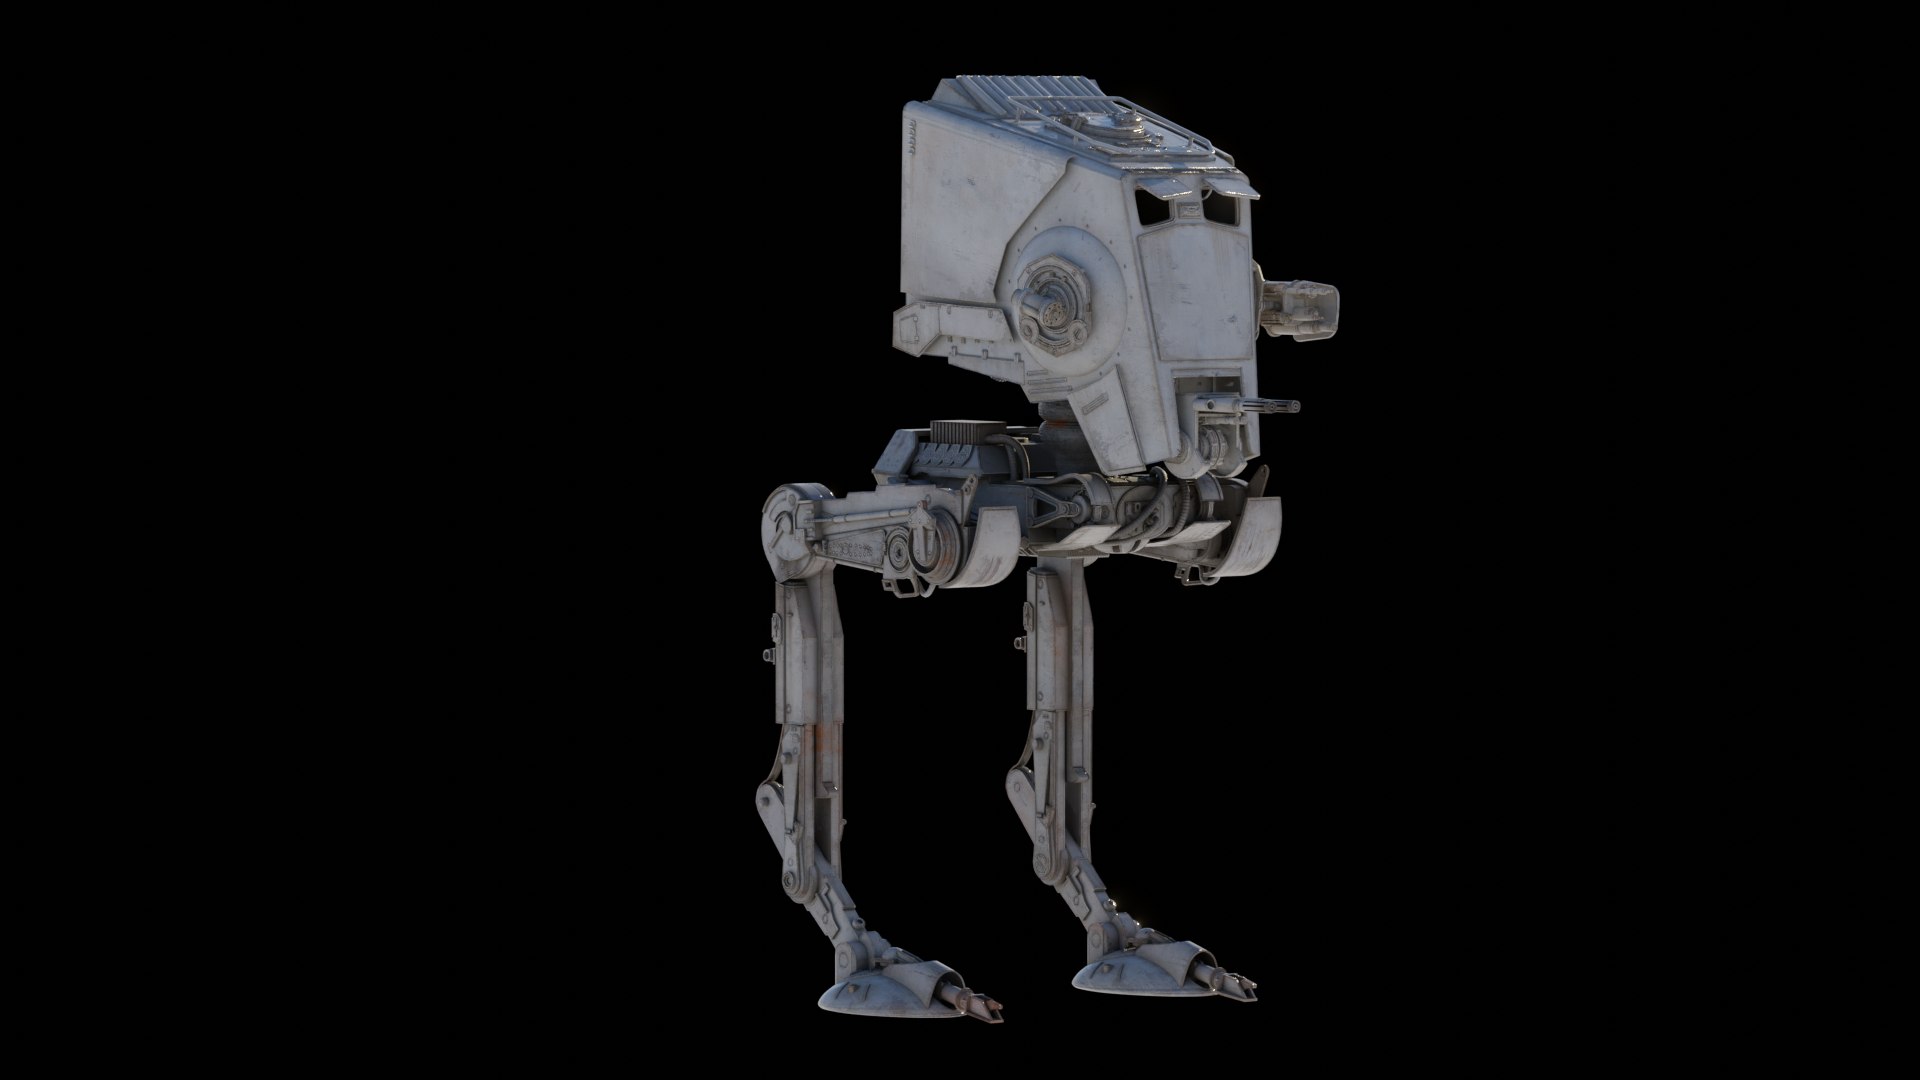 [Star Wars] AT-ST (All Terrain Scout Transport)